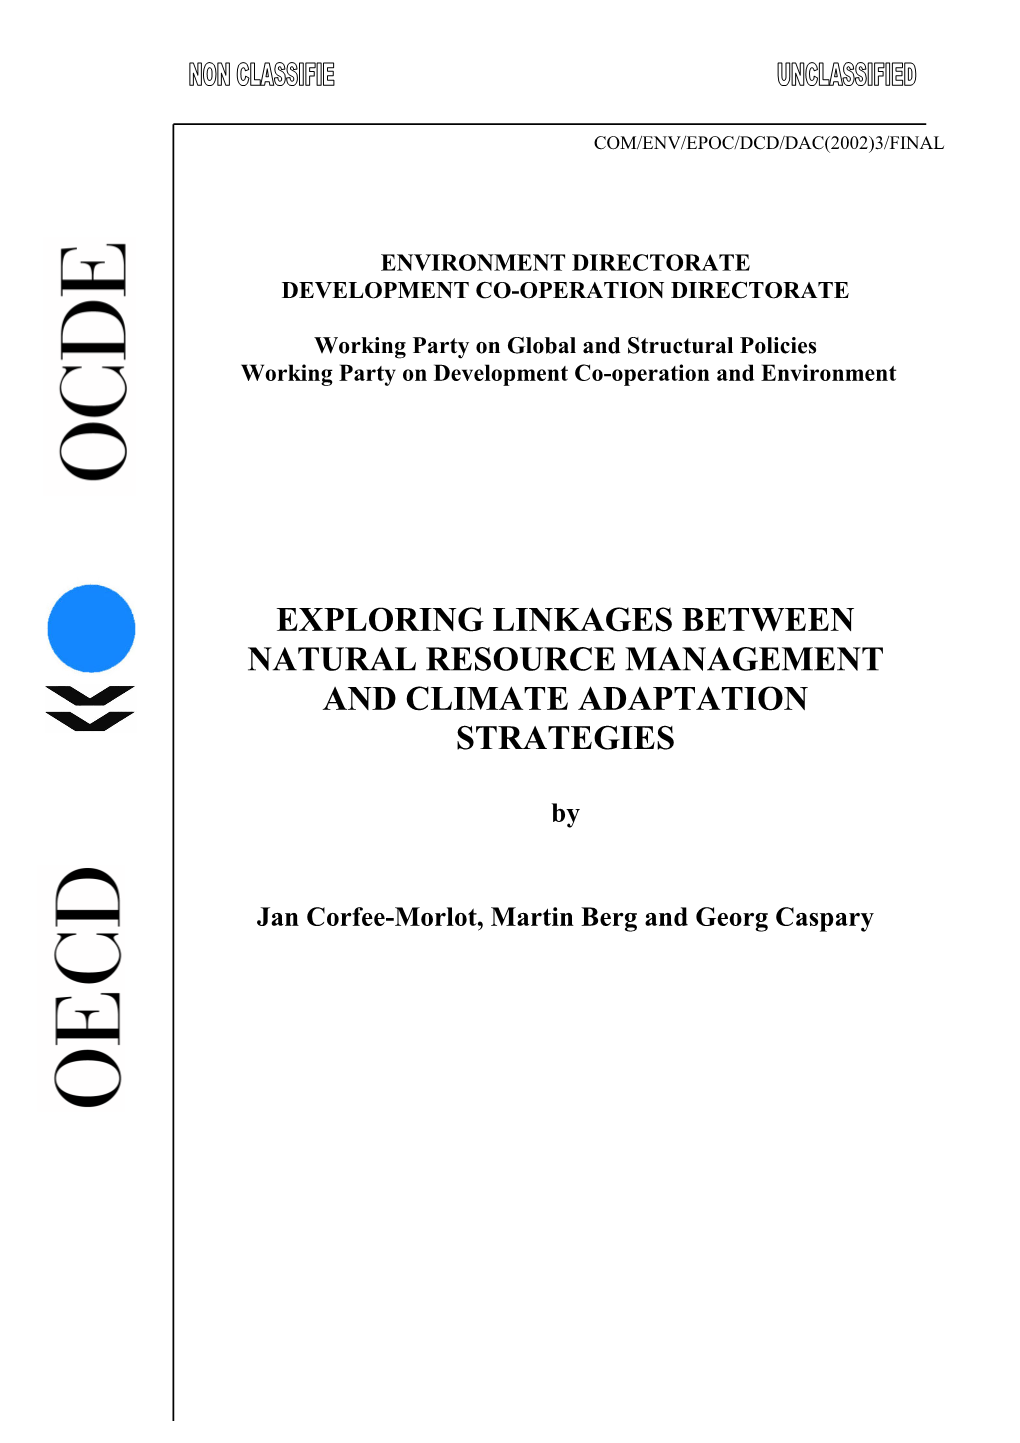 Exploring Linkages Between Natural Resource Management and Climate Adaptation Strategies